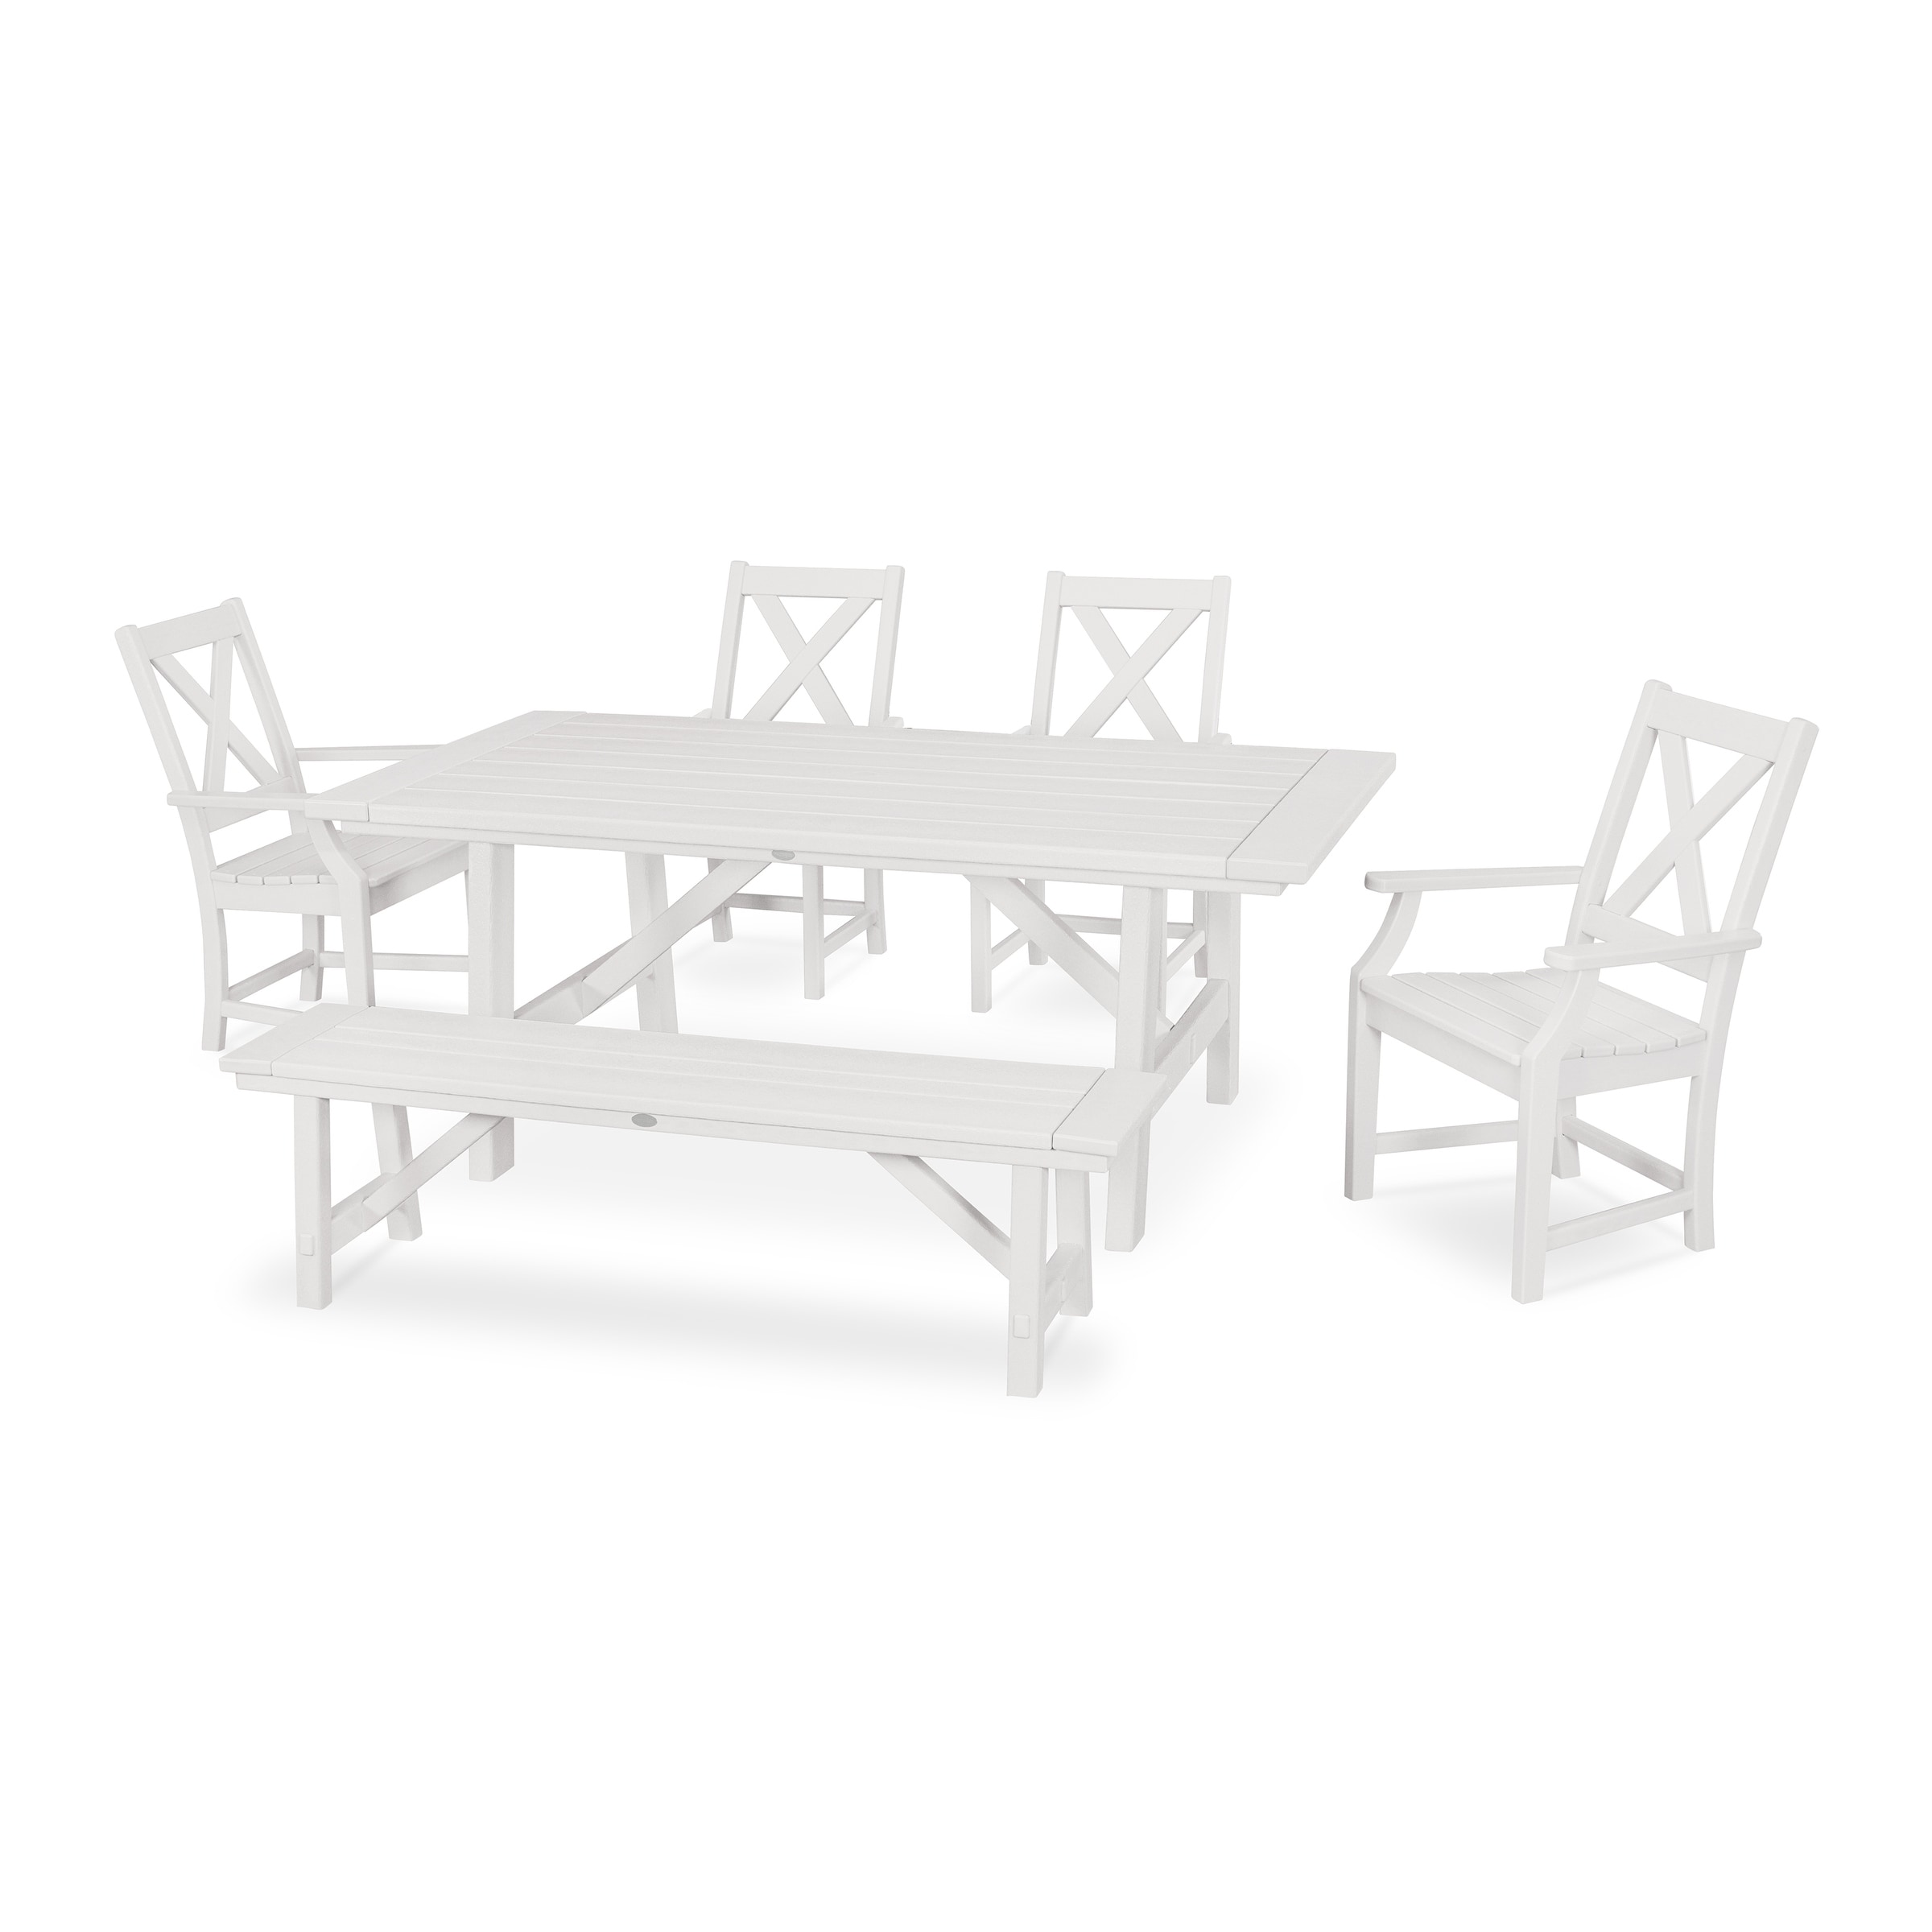 Polywood Braxton 6-piece Rustic Farmhouse Arm Chair Dining Set With Bench